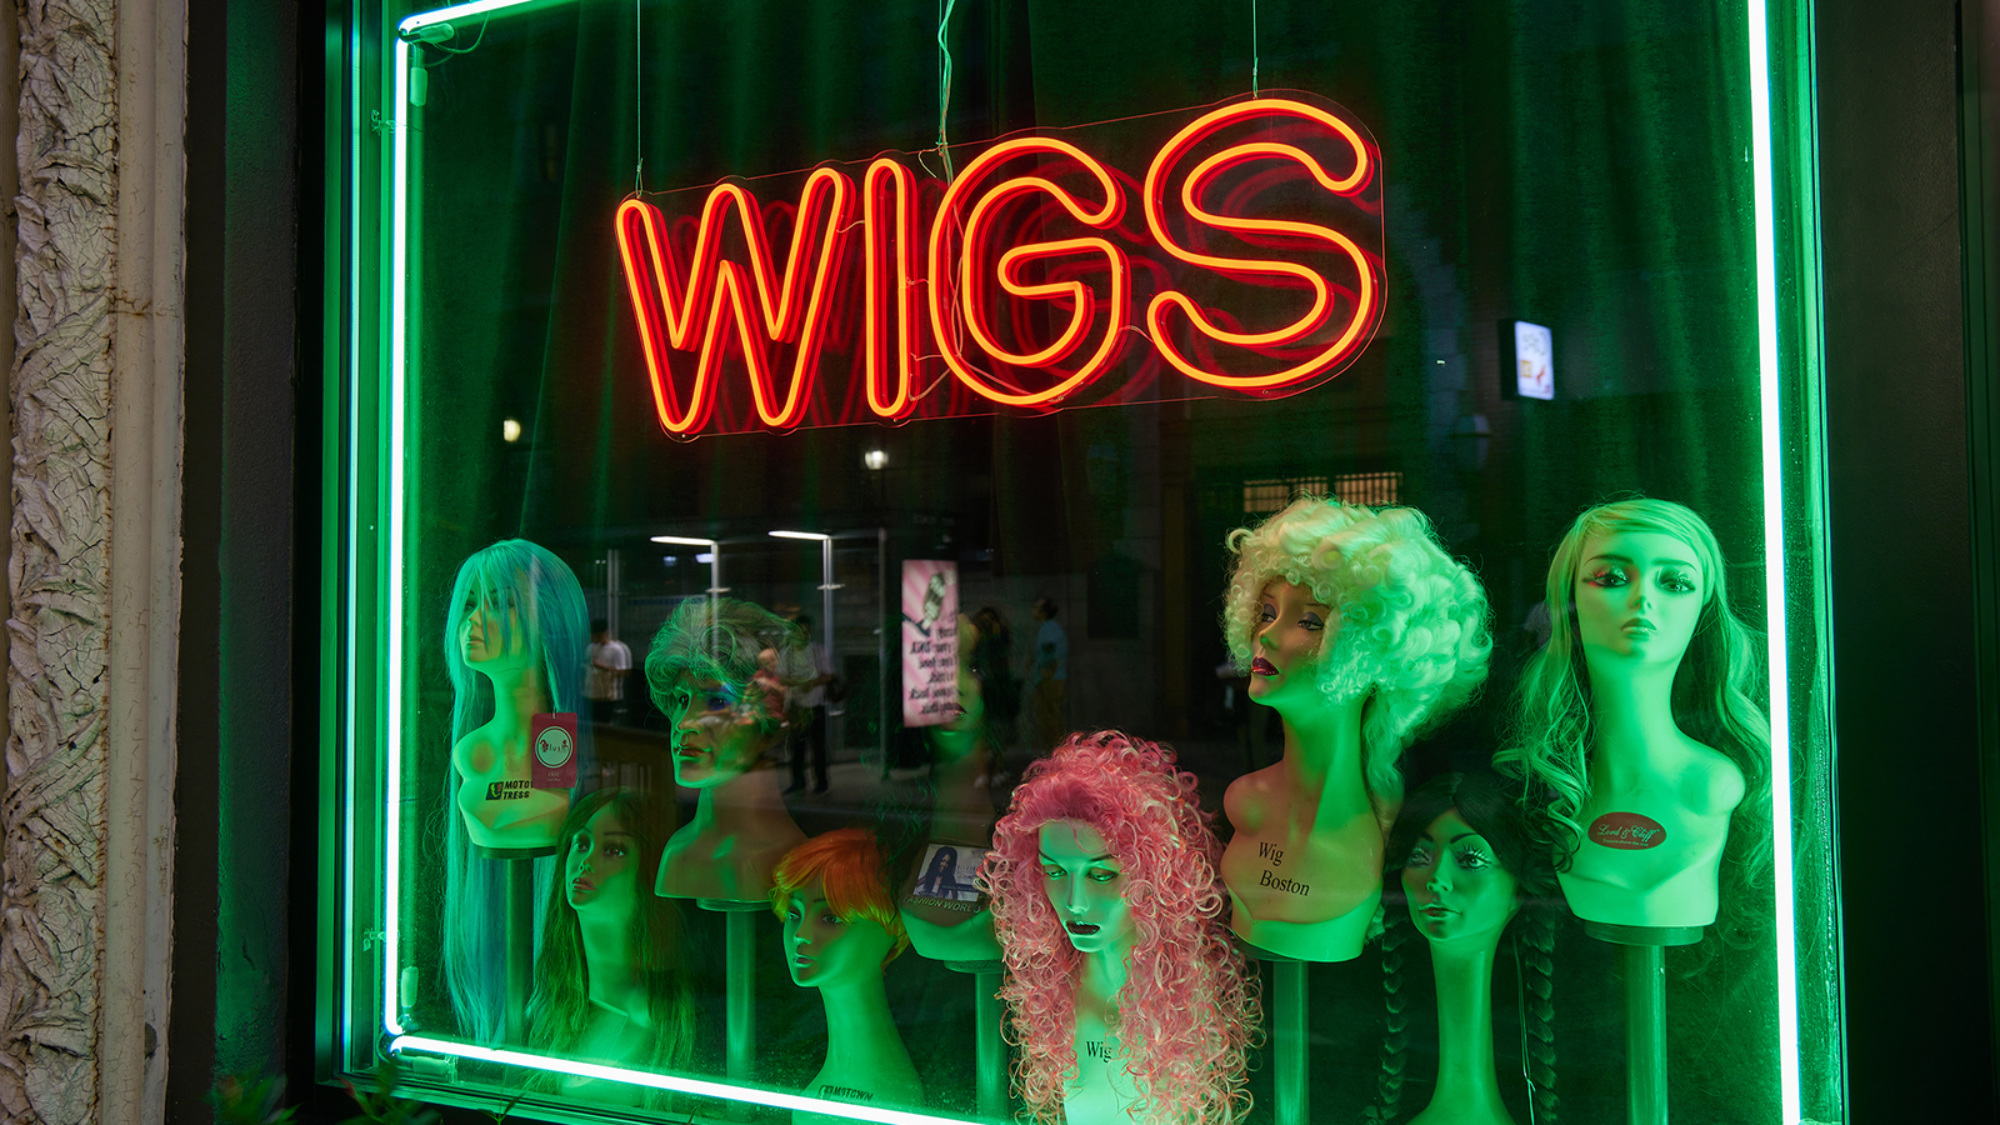 The wig window at The Wig Shop in Boston.